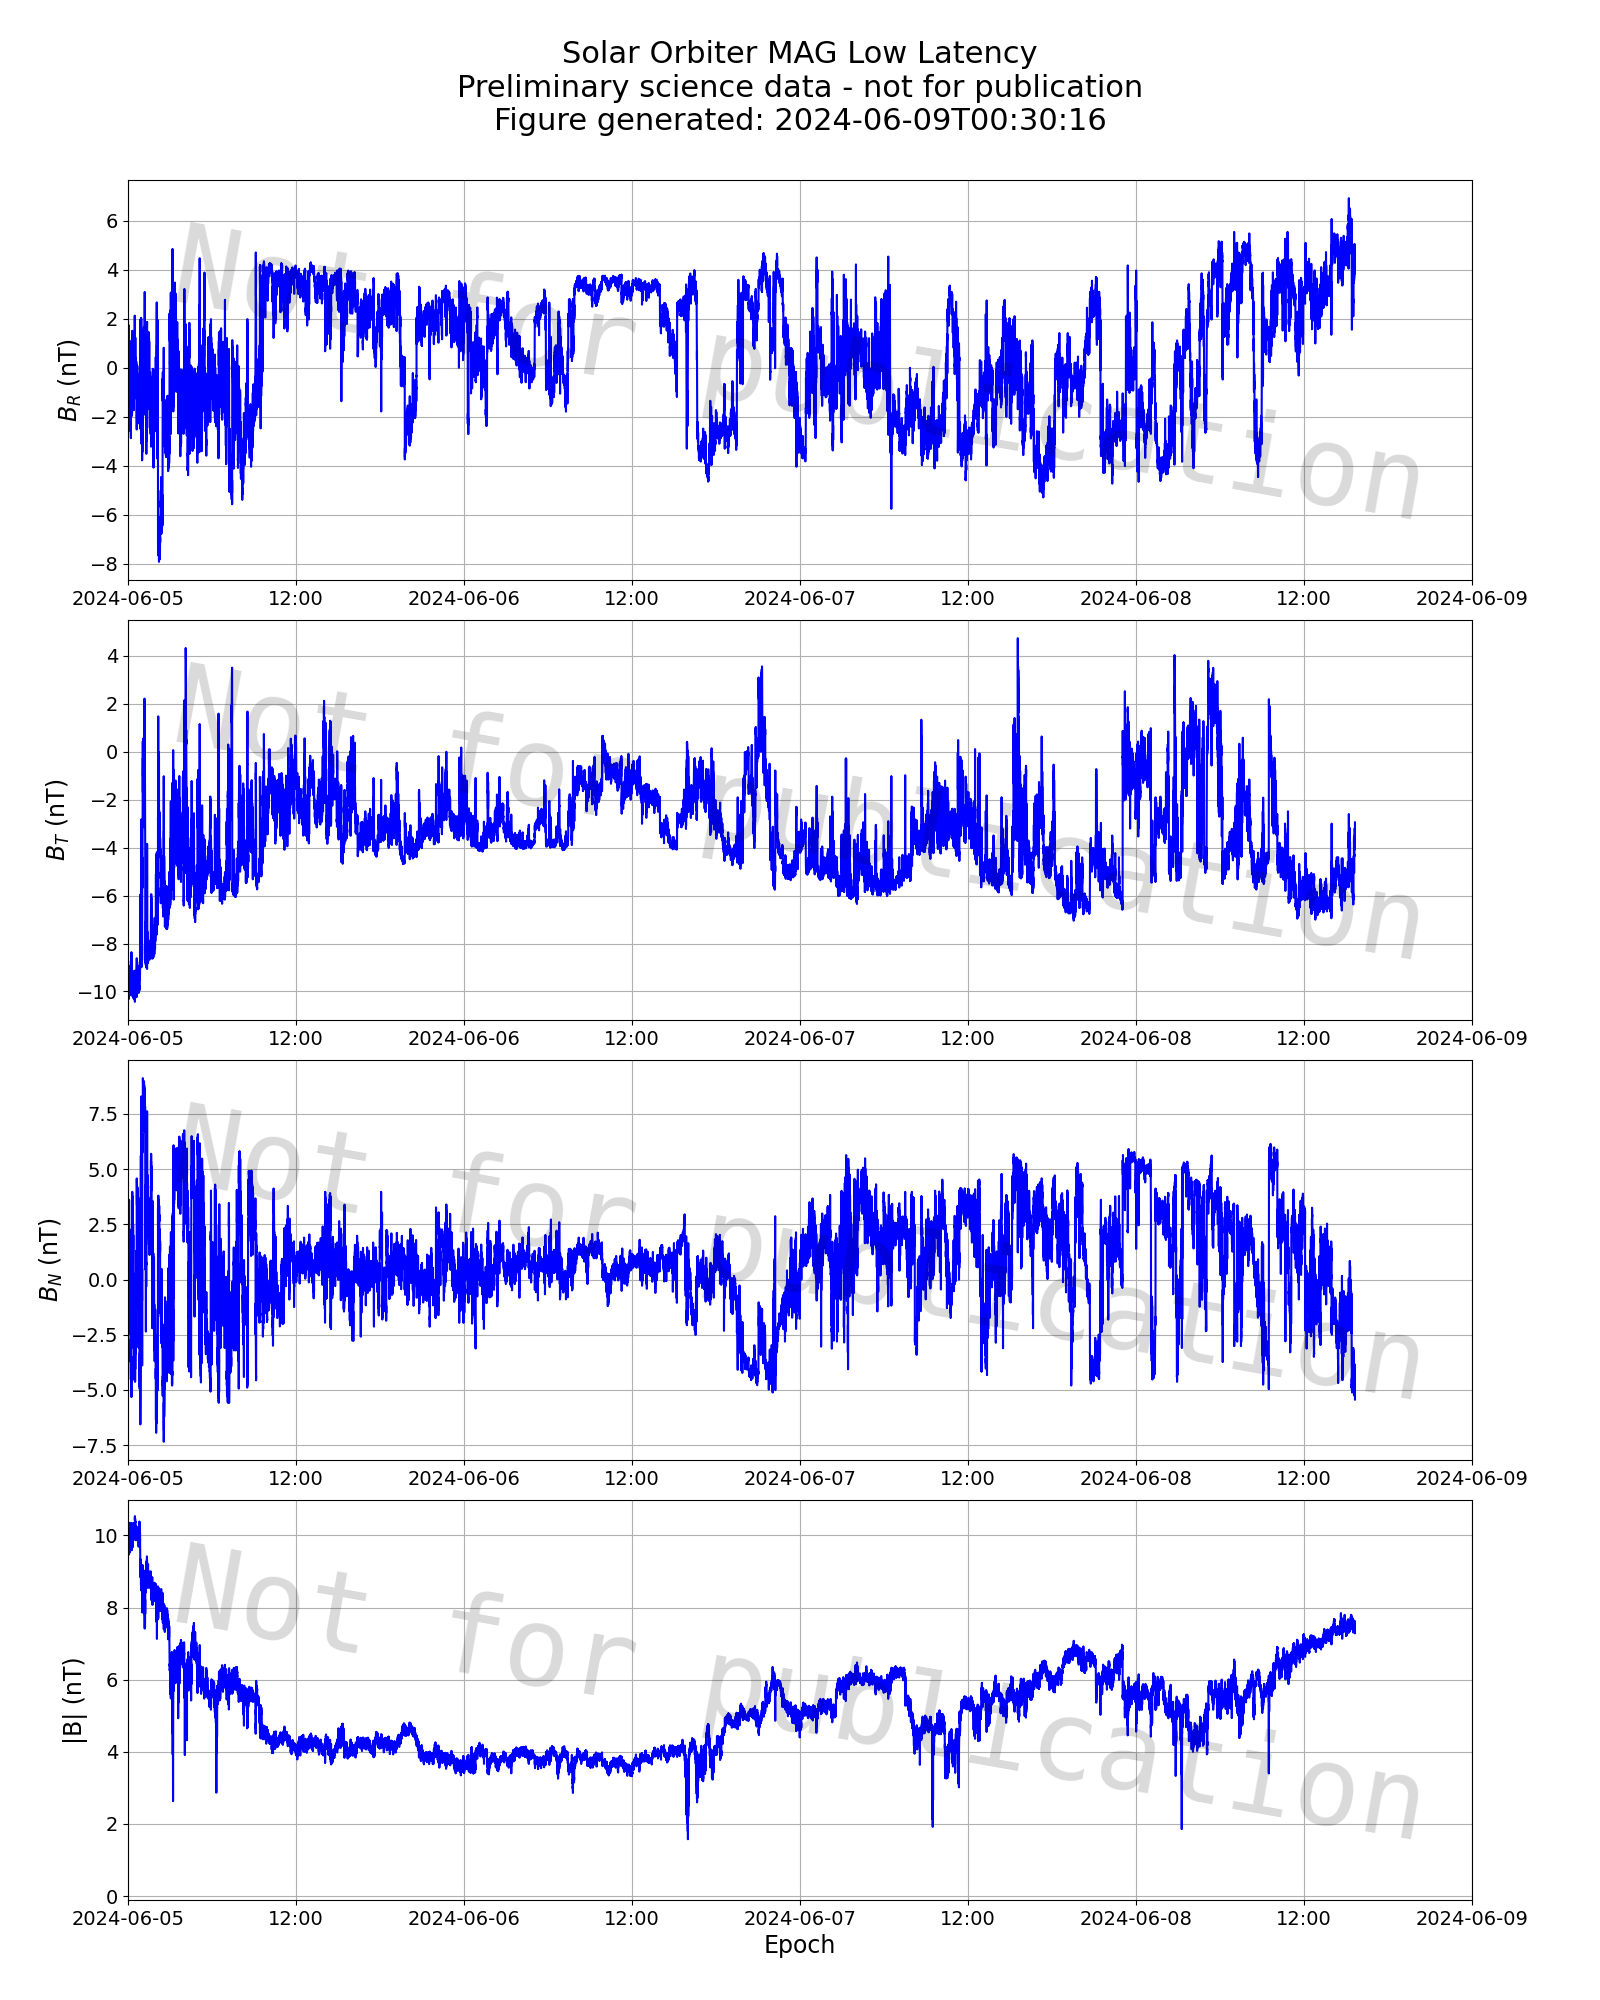 A plot of the latest magnetic field data from the Solar Orbiter spacecraft. Accessible versions of this data can be downloaded from the Solar Orbiter Archive after calibration.